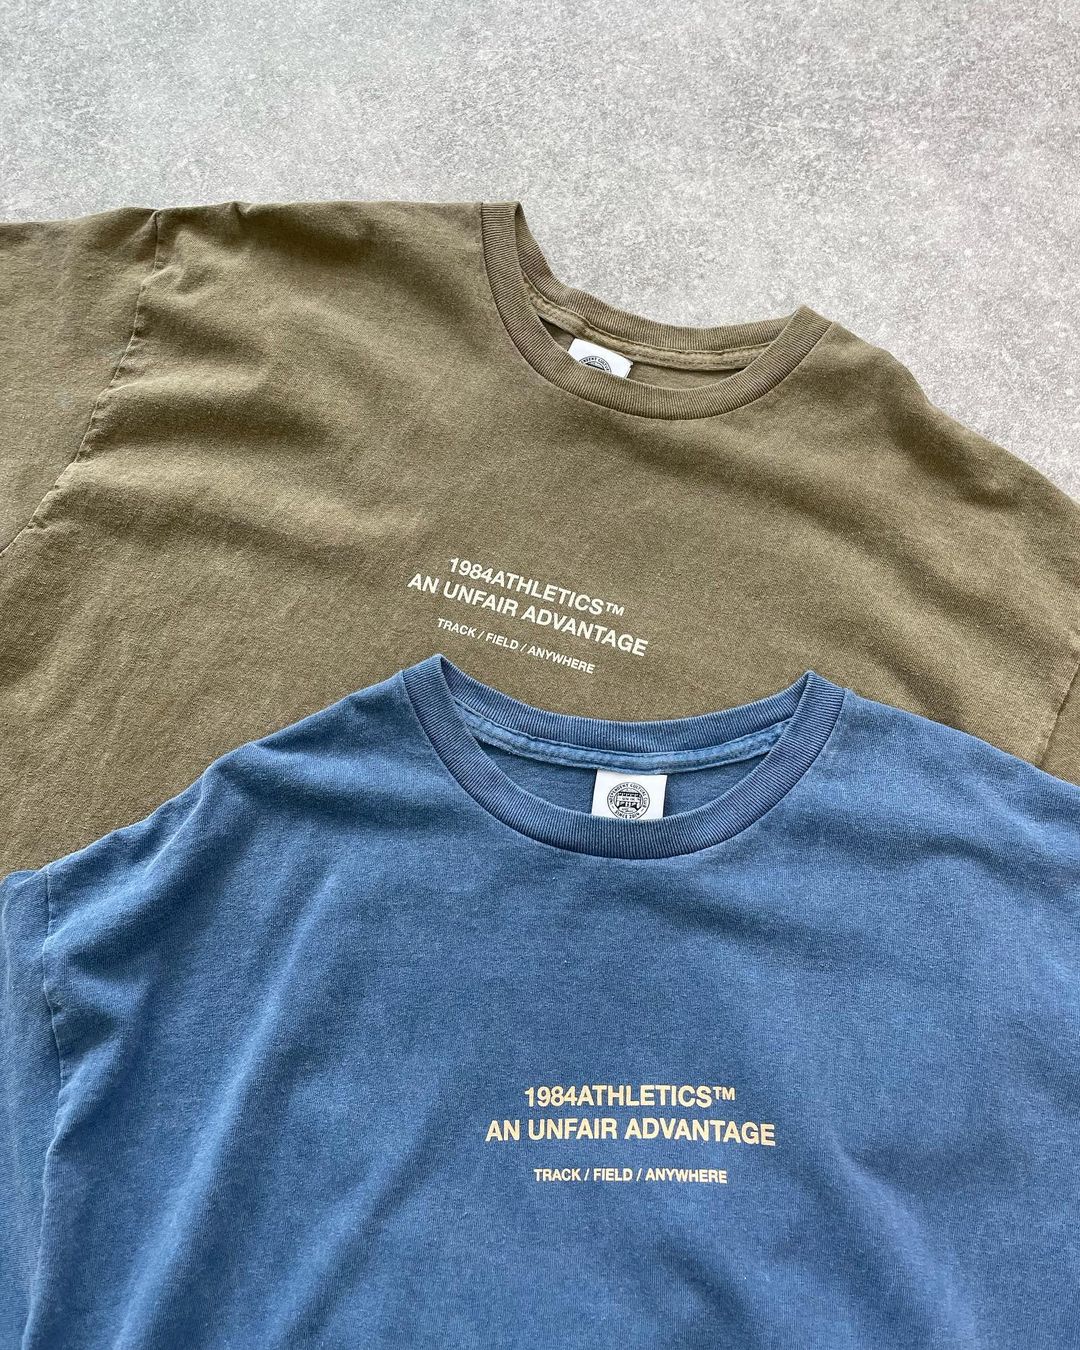 Vice 84 'Athletics' Vintage Washed Tee Twinpack - Pacific Blue/Army Green